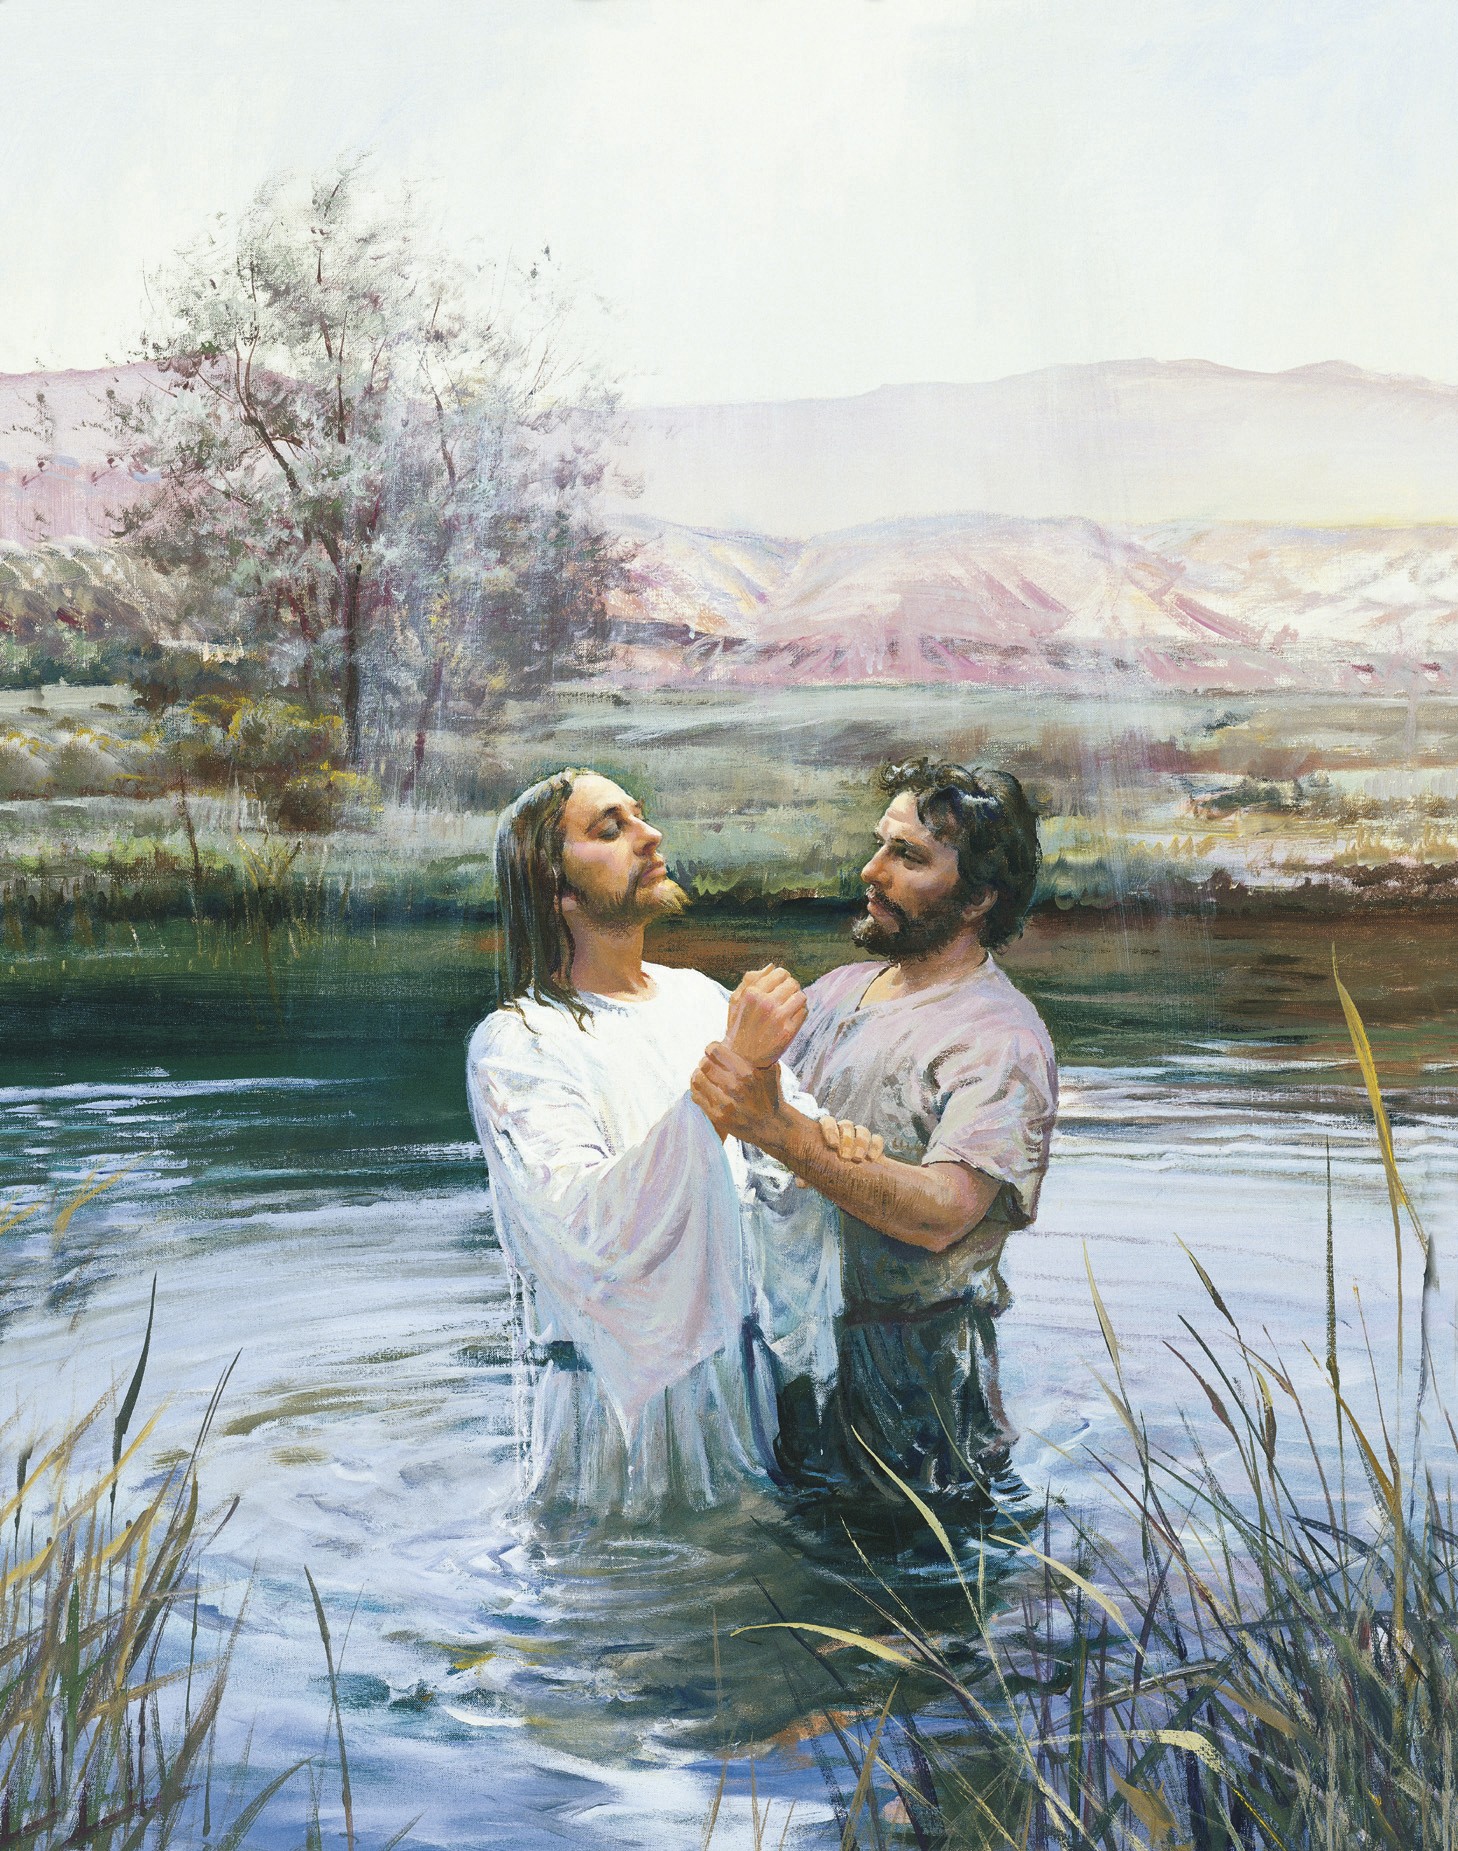 John the Baptist holding onto the wrist of Jesus Christ, whom he has just immersed in the waters of the River Jordan that surround them.